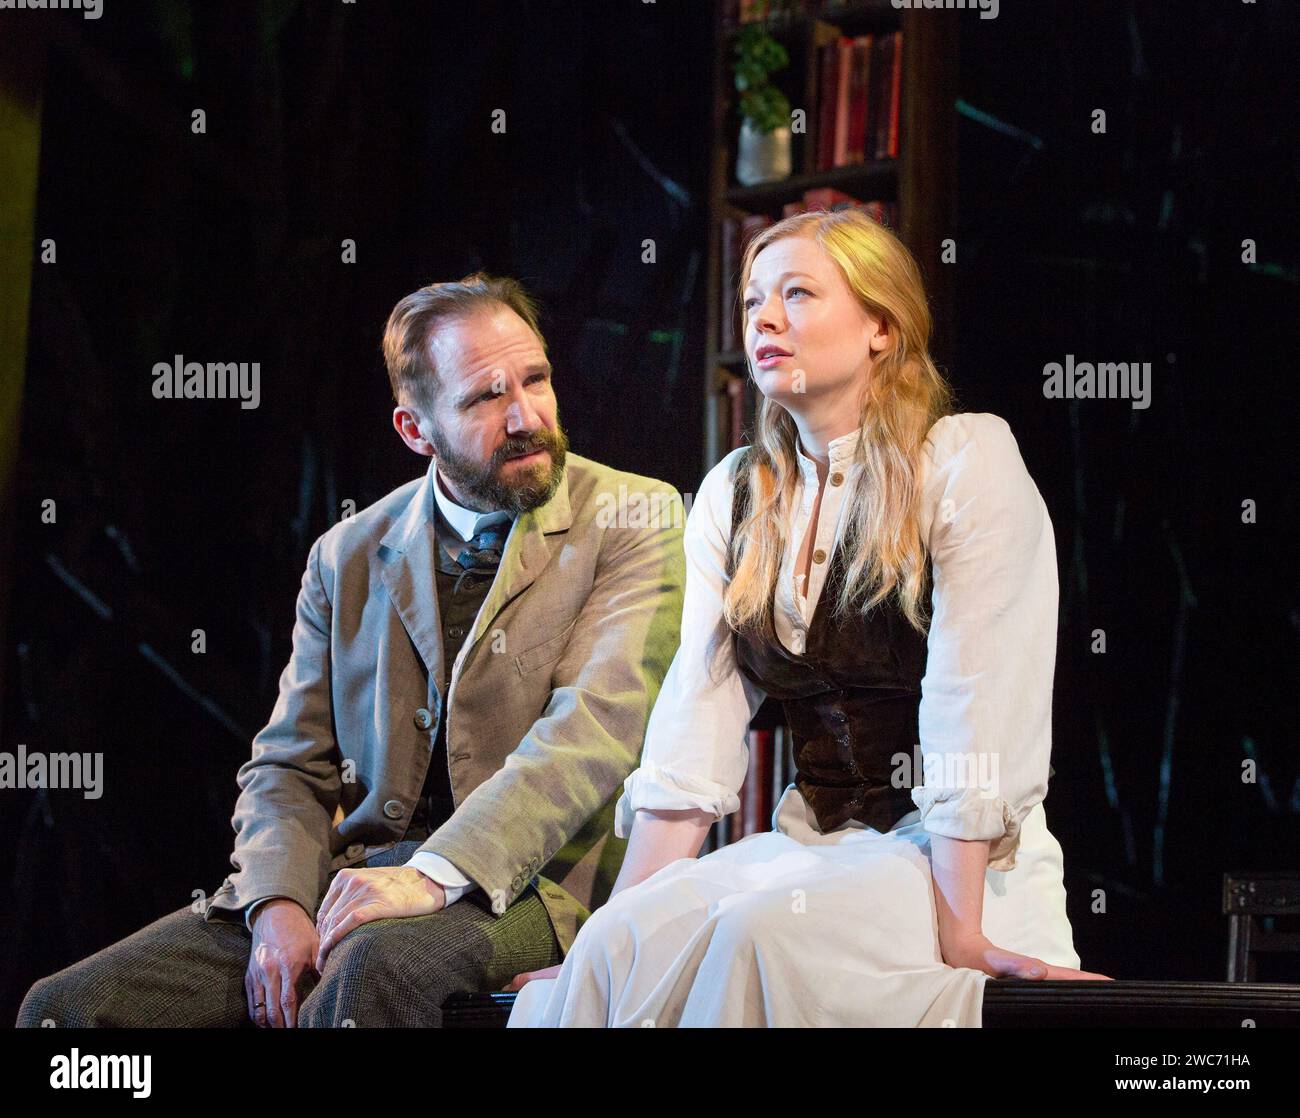 Ralph Fiennes (Halvard Solness), Sarah Snook (Hilde Wangel) in THE MASTER BUILDER by Henrik Ibsen at the Old Vic Theatre, London SE1  03/02/2016 adapted by David Hare  design: Rob Howell  lighting: Hugh Vanstone  director: Matthew Warchus Stock Photo